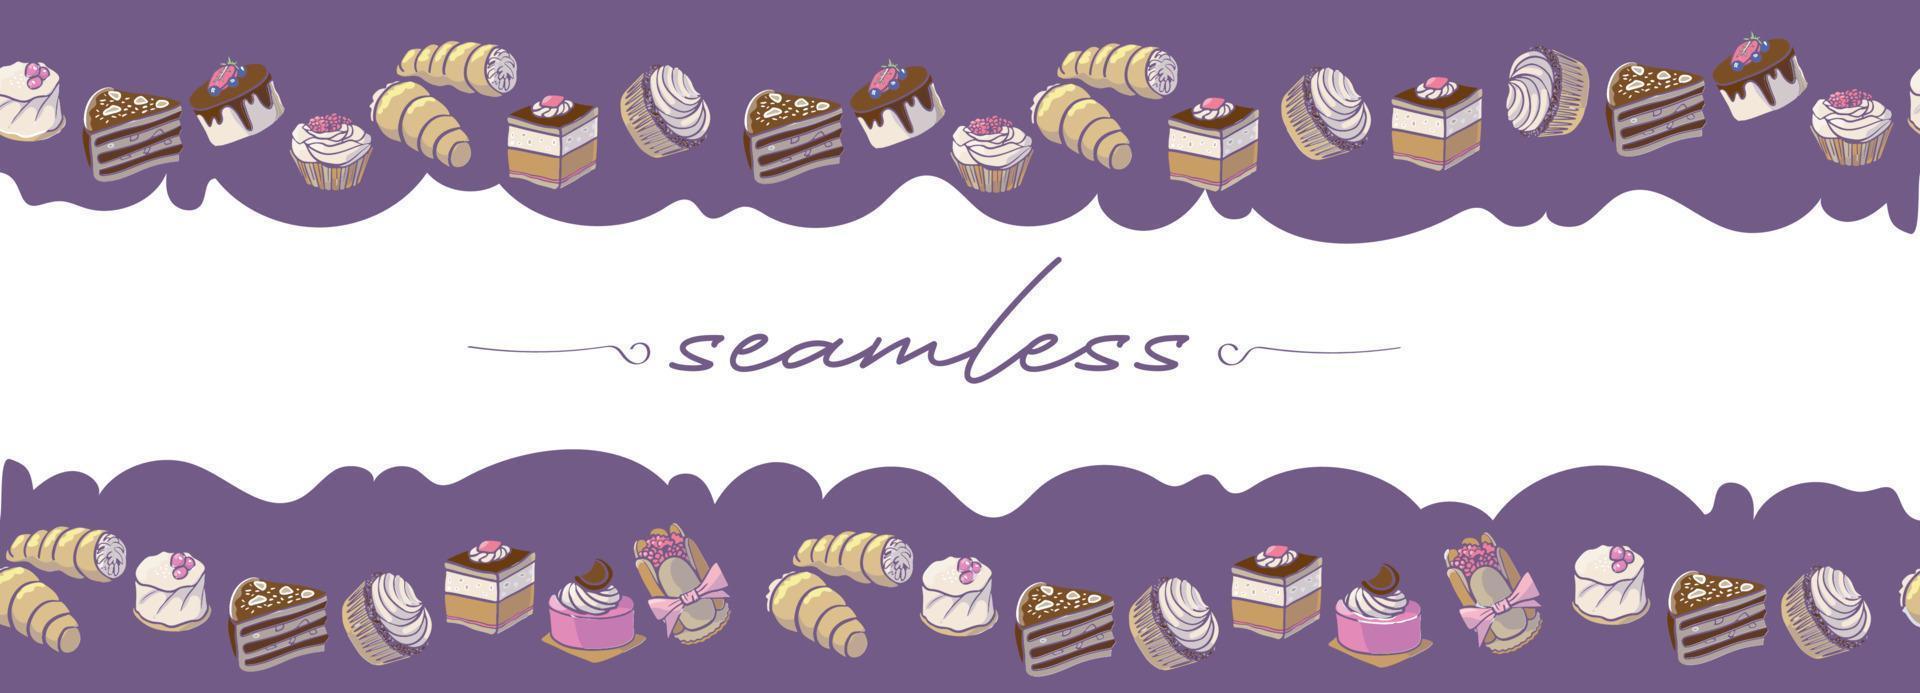 Horizontal Border Pattern with Cake and Pie Slices. Background with Bakery Sweets. vector